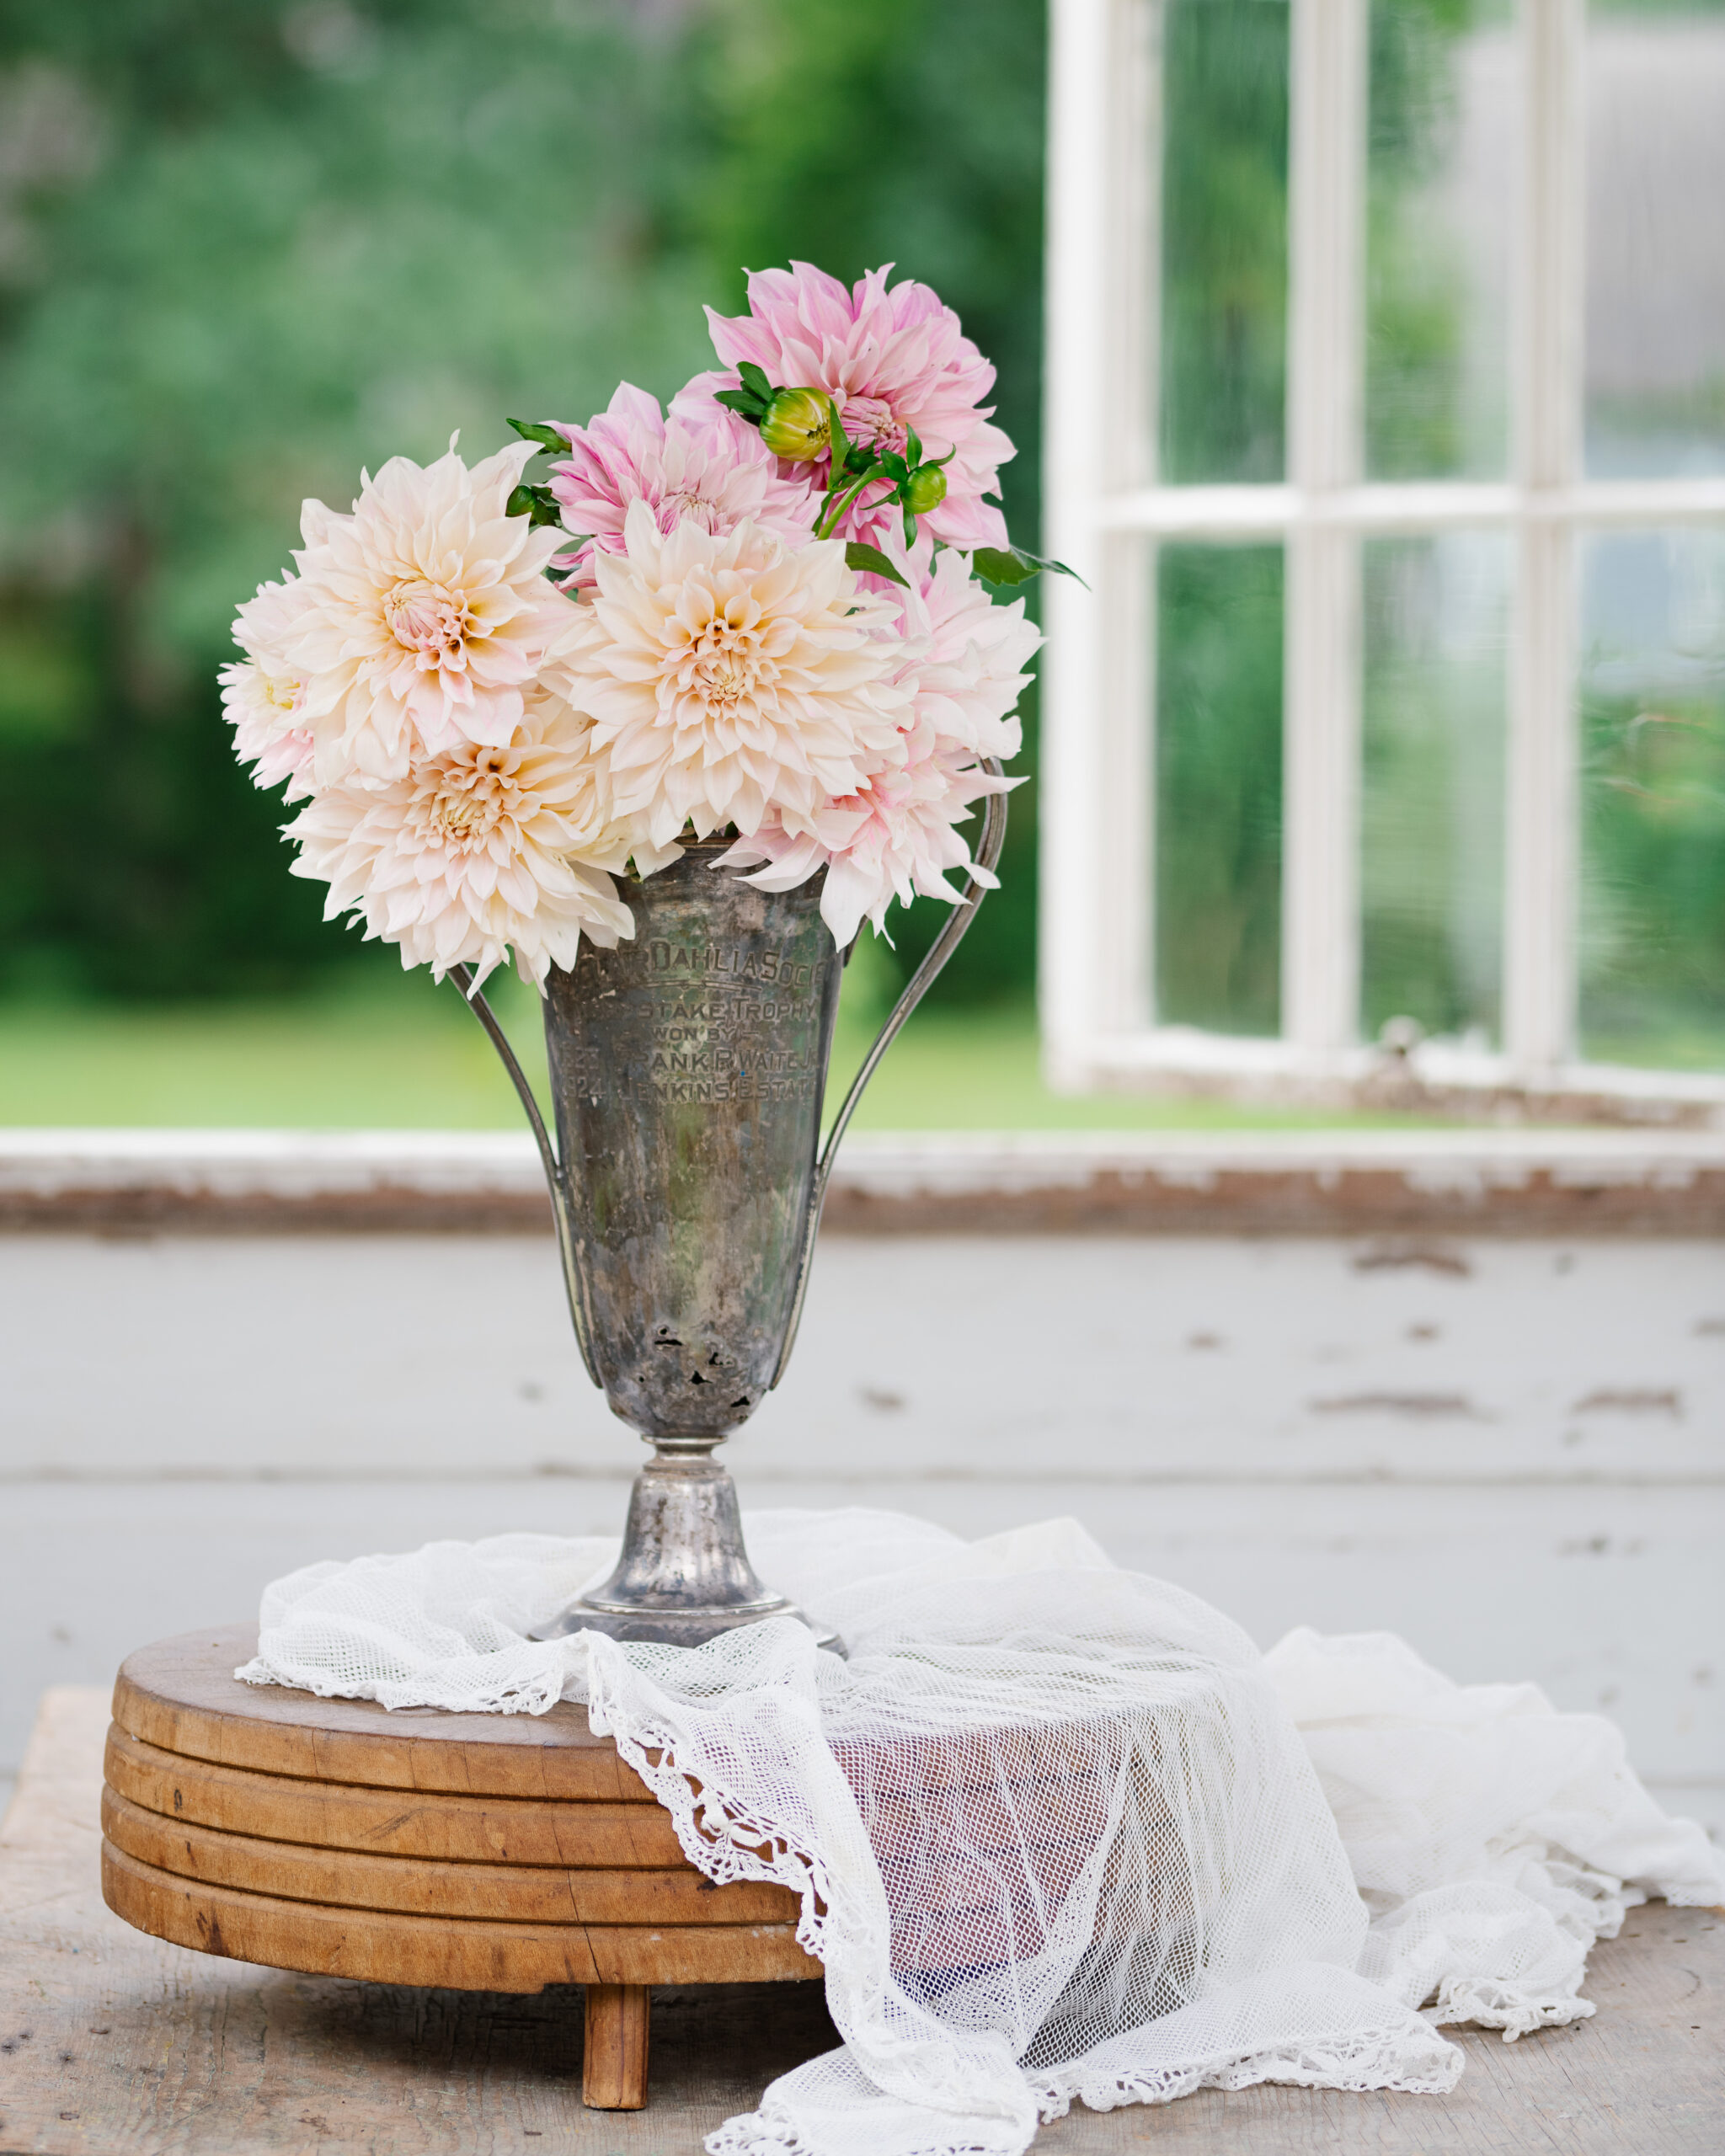 Antique Dahlia Trophy Filled With Dahlias From The Flower Garden